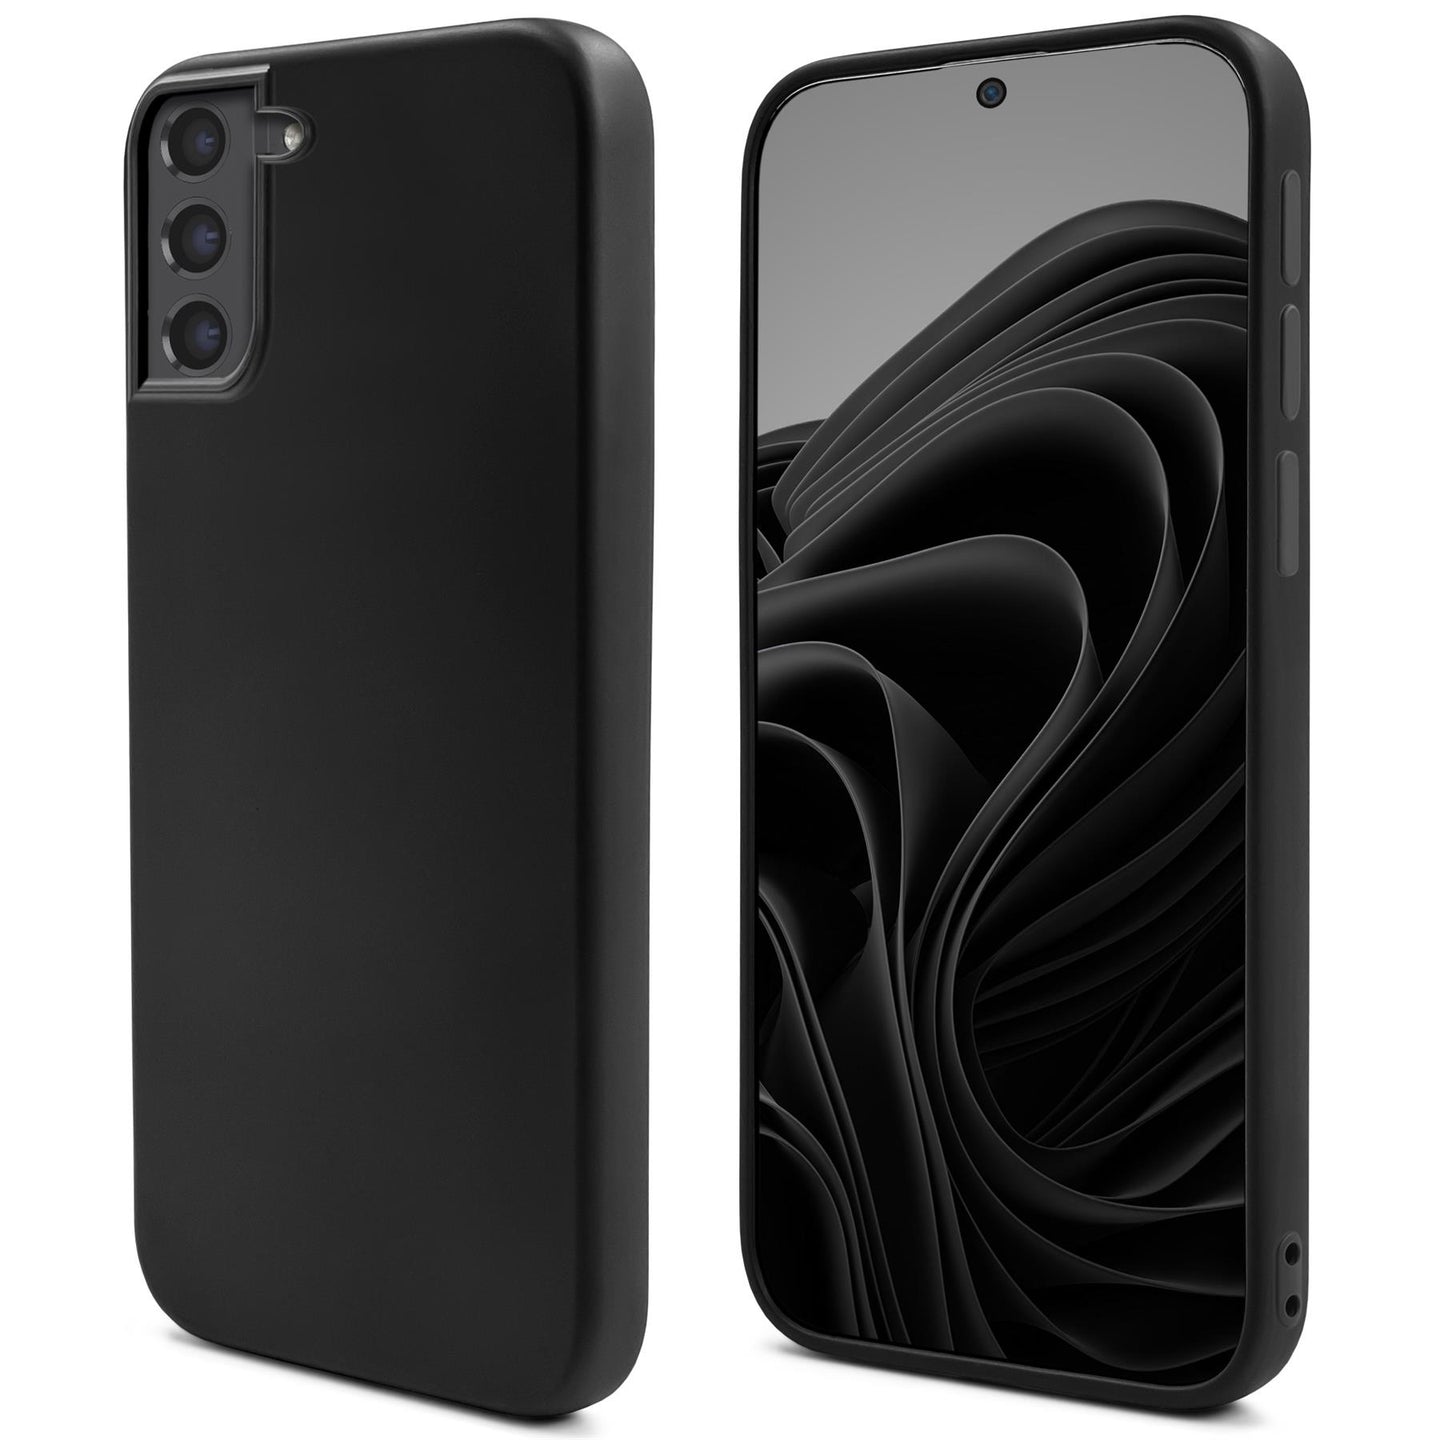 Moozy Lifestyle. Silicone Case for Samsung S21 FE, Black - Liquid Silicone Lightweight Cover with Matte Finish and Soft Microfiber Lining, Premium Silicone Case